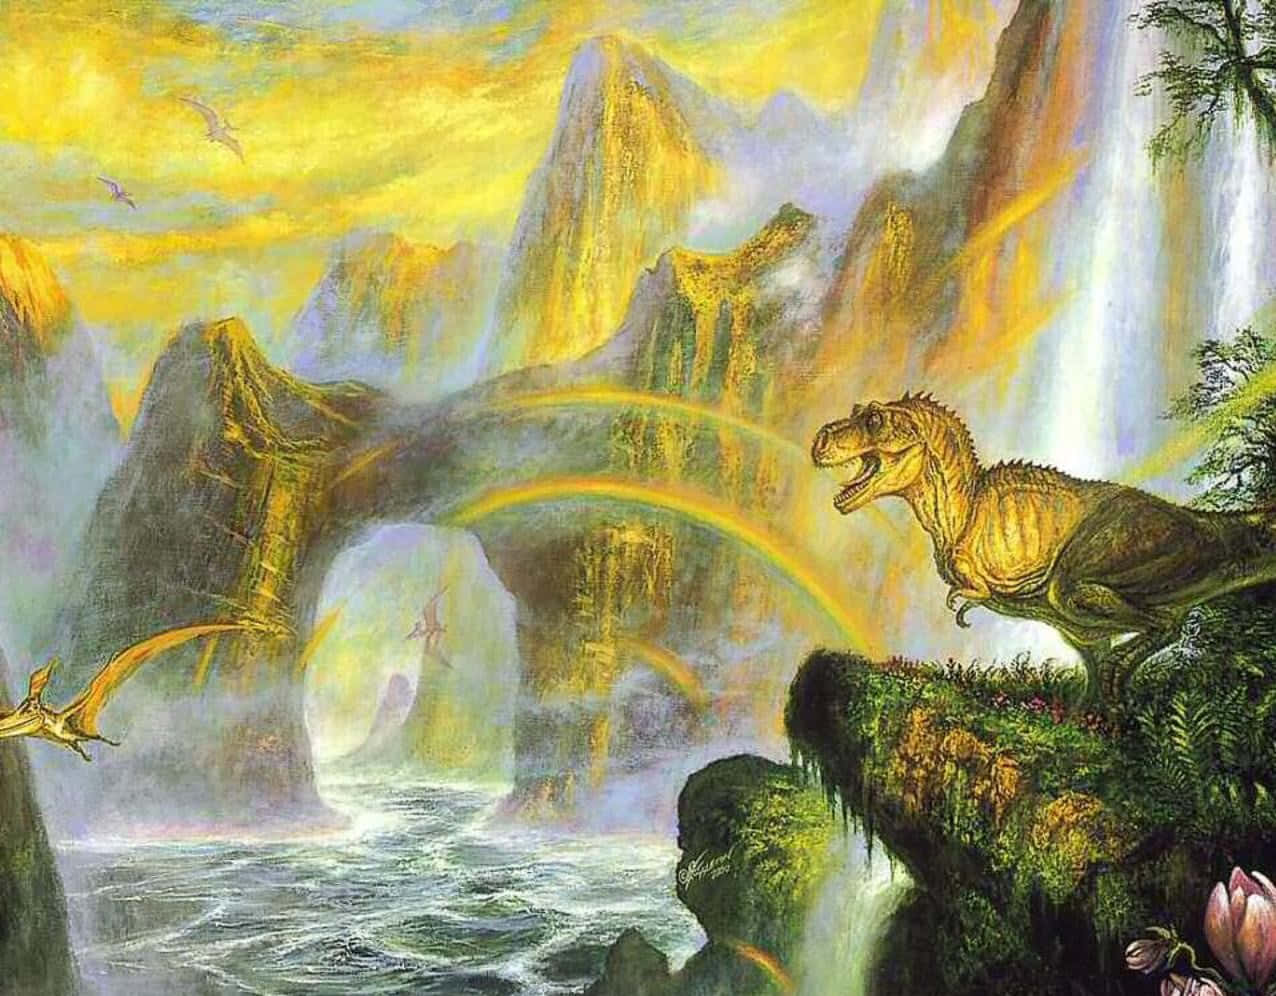 A Painting Of A Dinosaur In A Waterfall